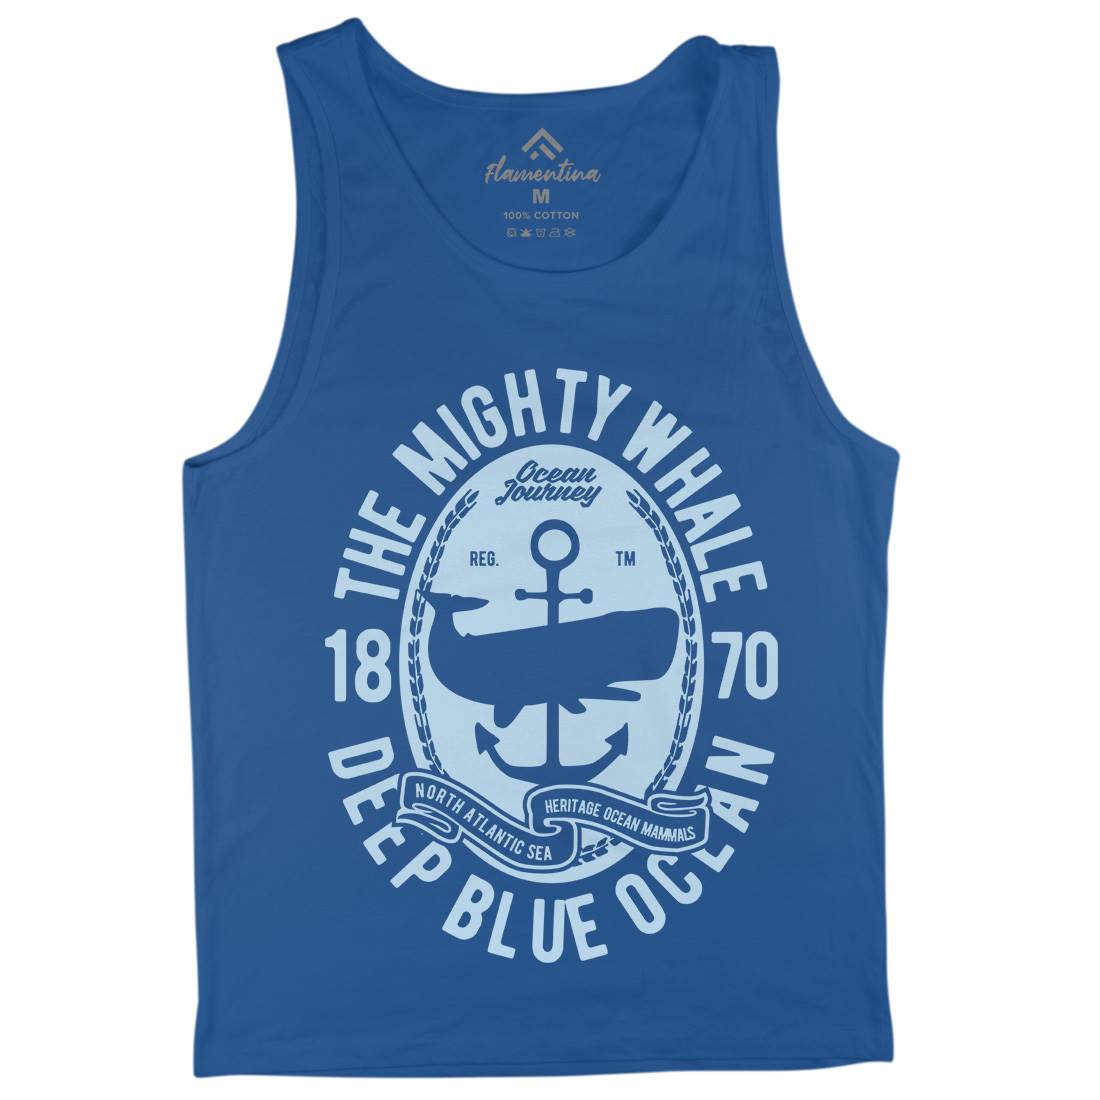 The Mighty Whale Mens Tank Top Vest Navy B466